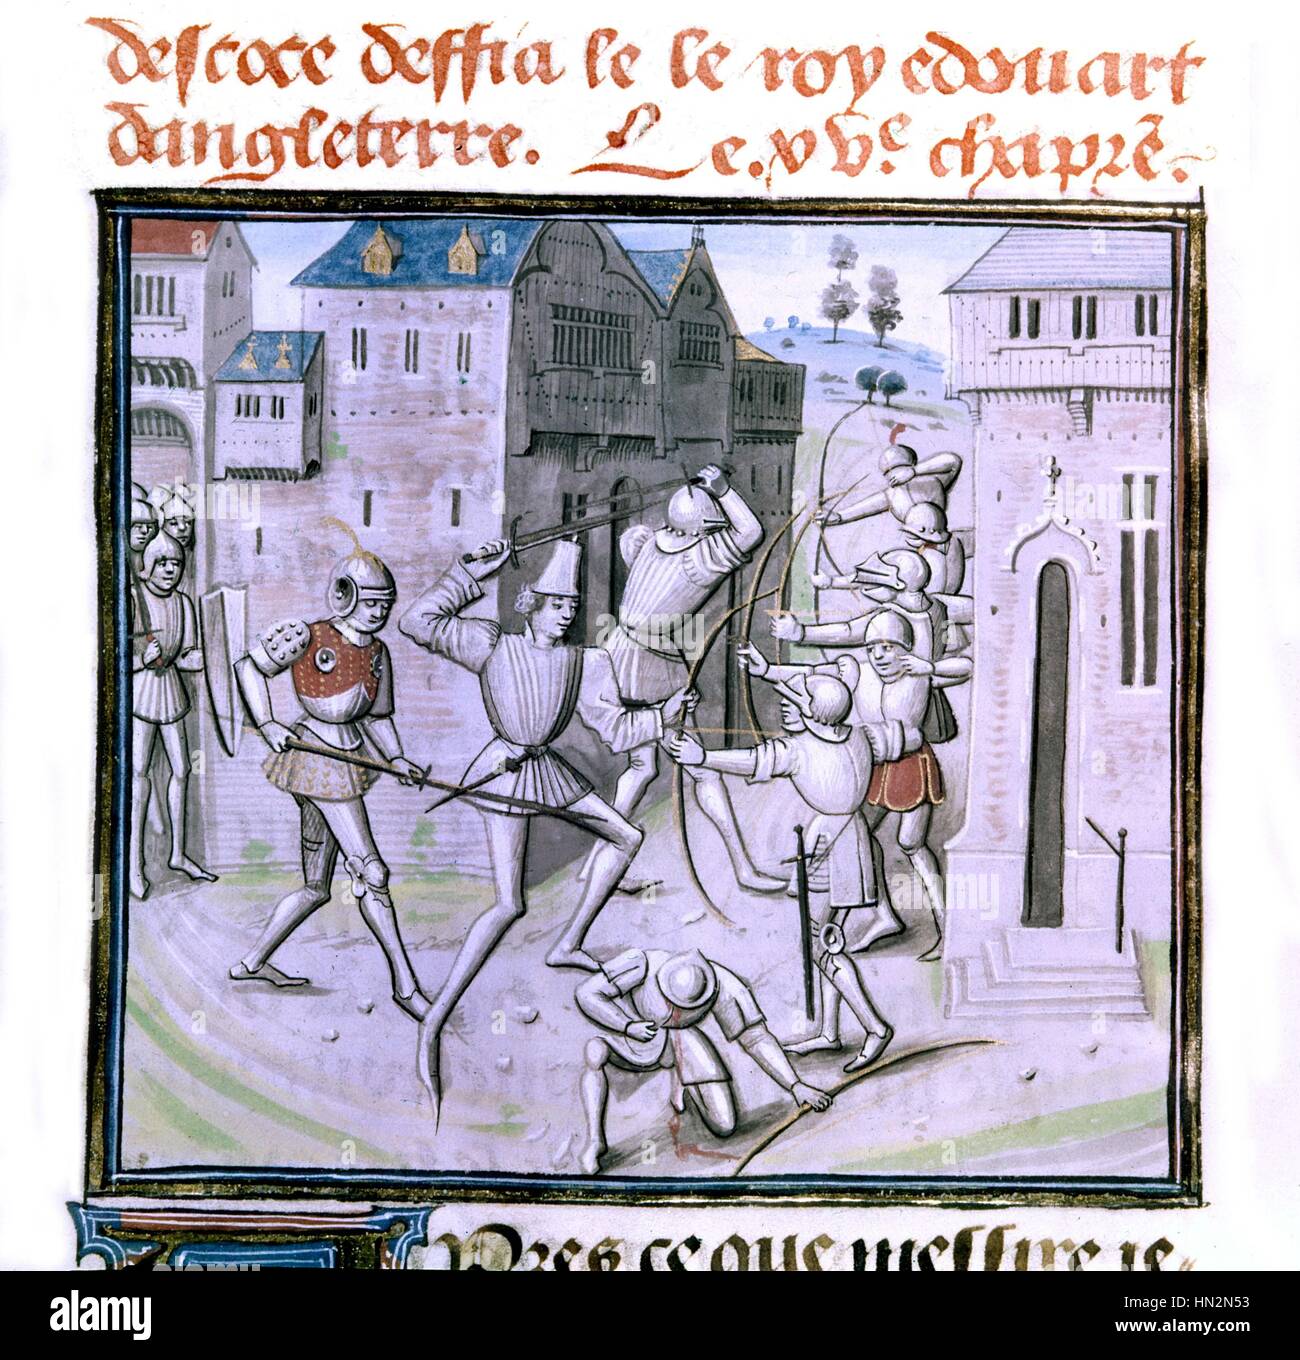 Chronicles of Froissart King of Scotland defying King Edward of England  15th century France Paris. Bibliotheque de l'arsenal Stock Photo